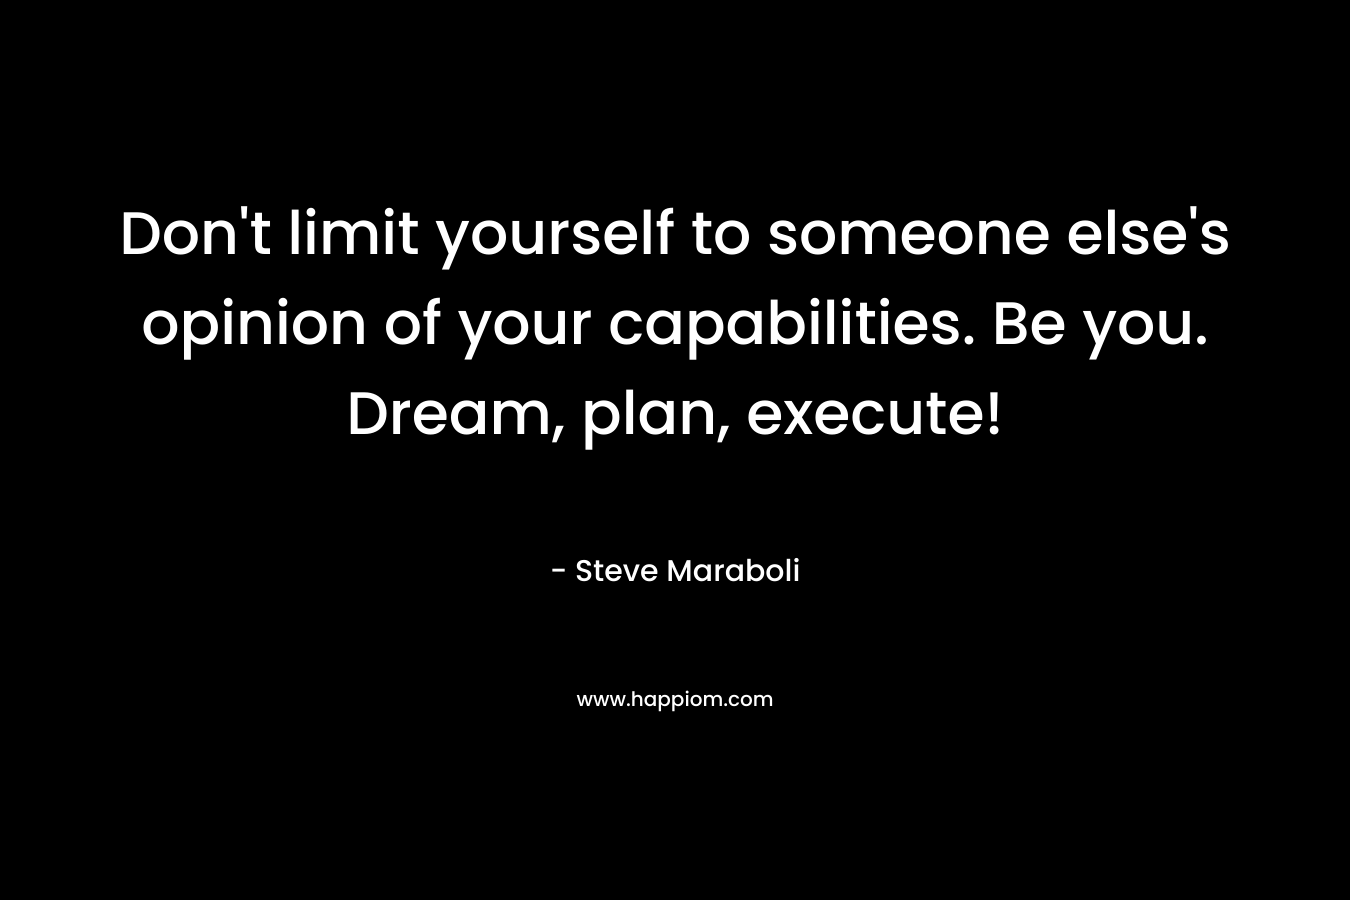 Don’t limit yourself to someone else’s opinion of your capabilities. Be you. Dream, plan, execute! – Steve Maraboli